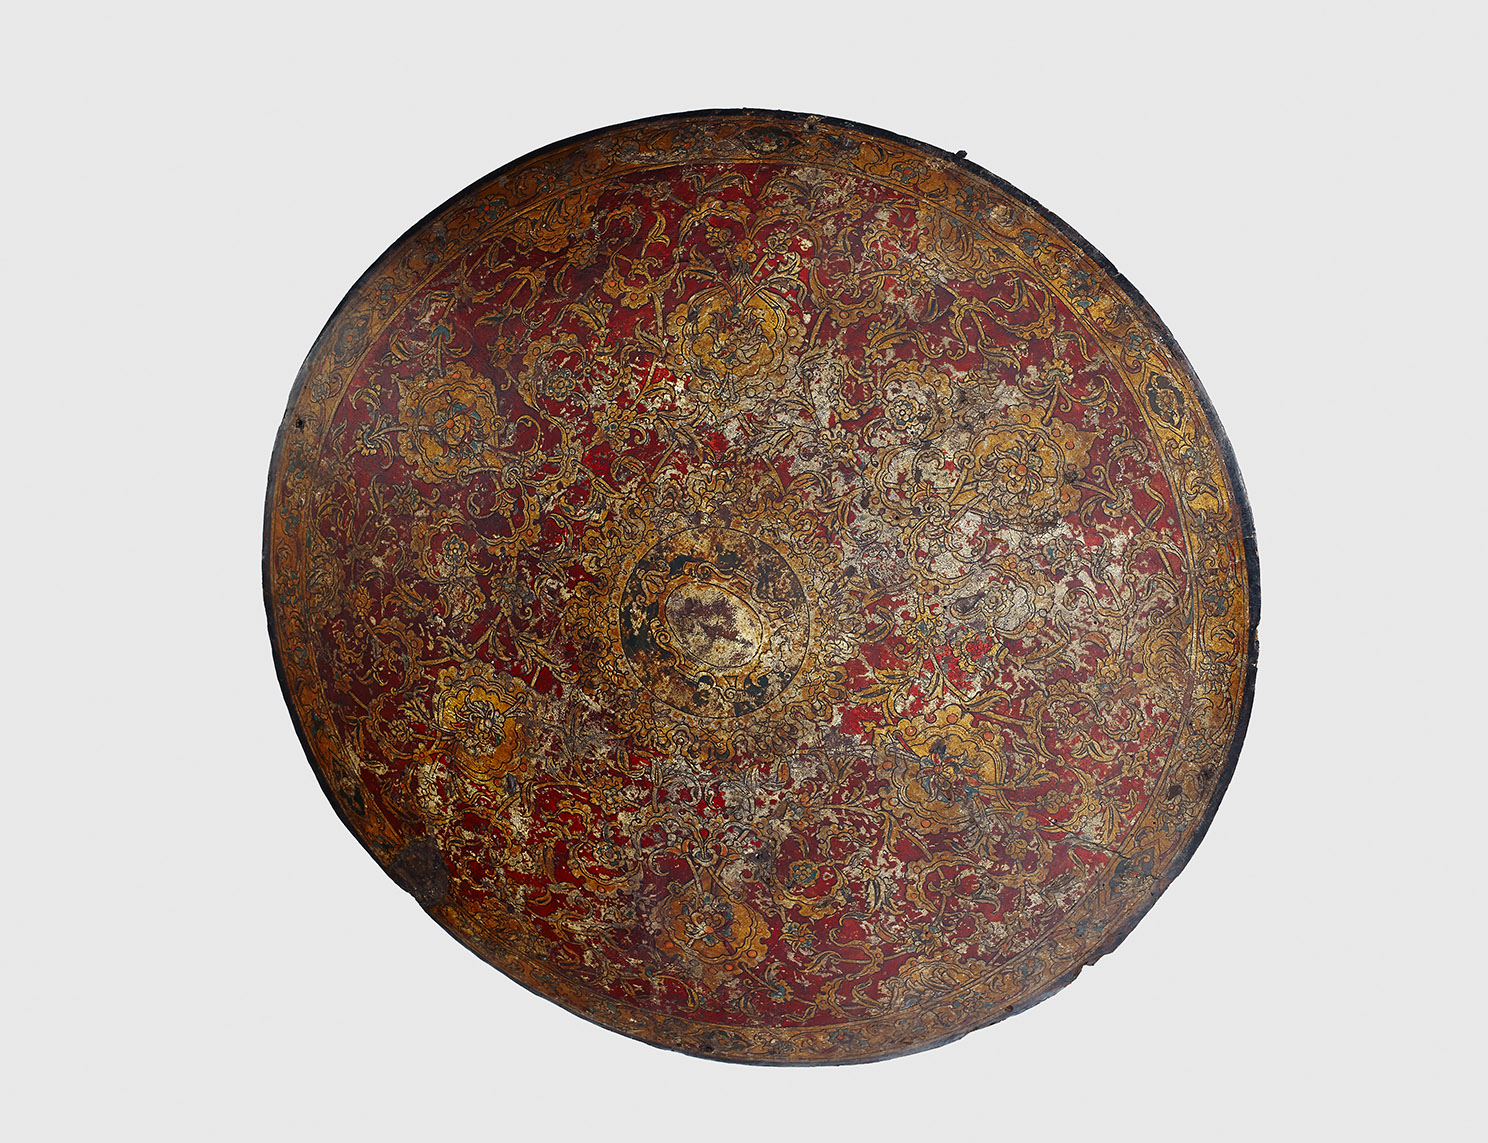 Venetian round shield in oriental style, ca. 1600, probably from the pageantry equipment under Archbishop Mark Sittich, leather, inv. no. WA 3598